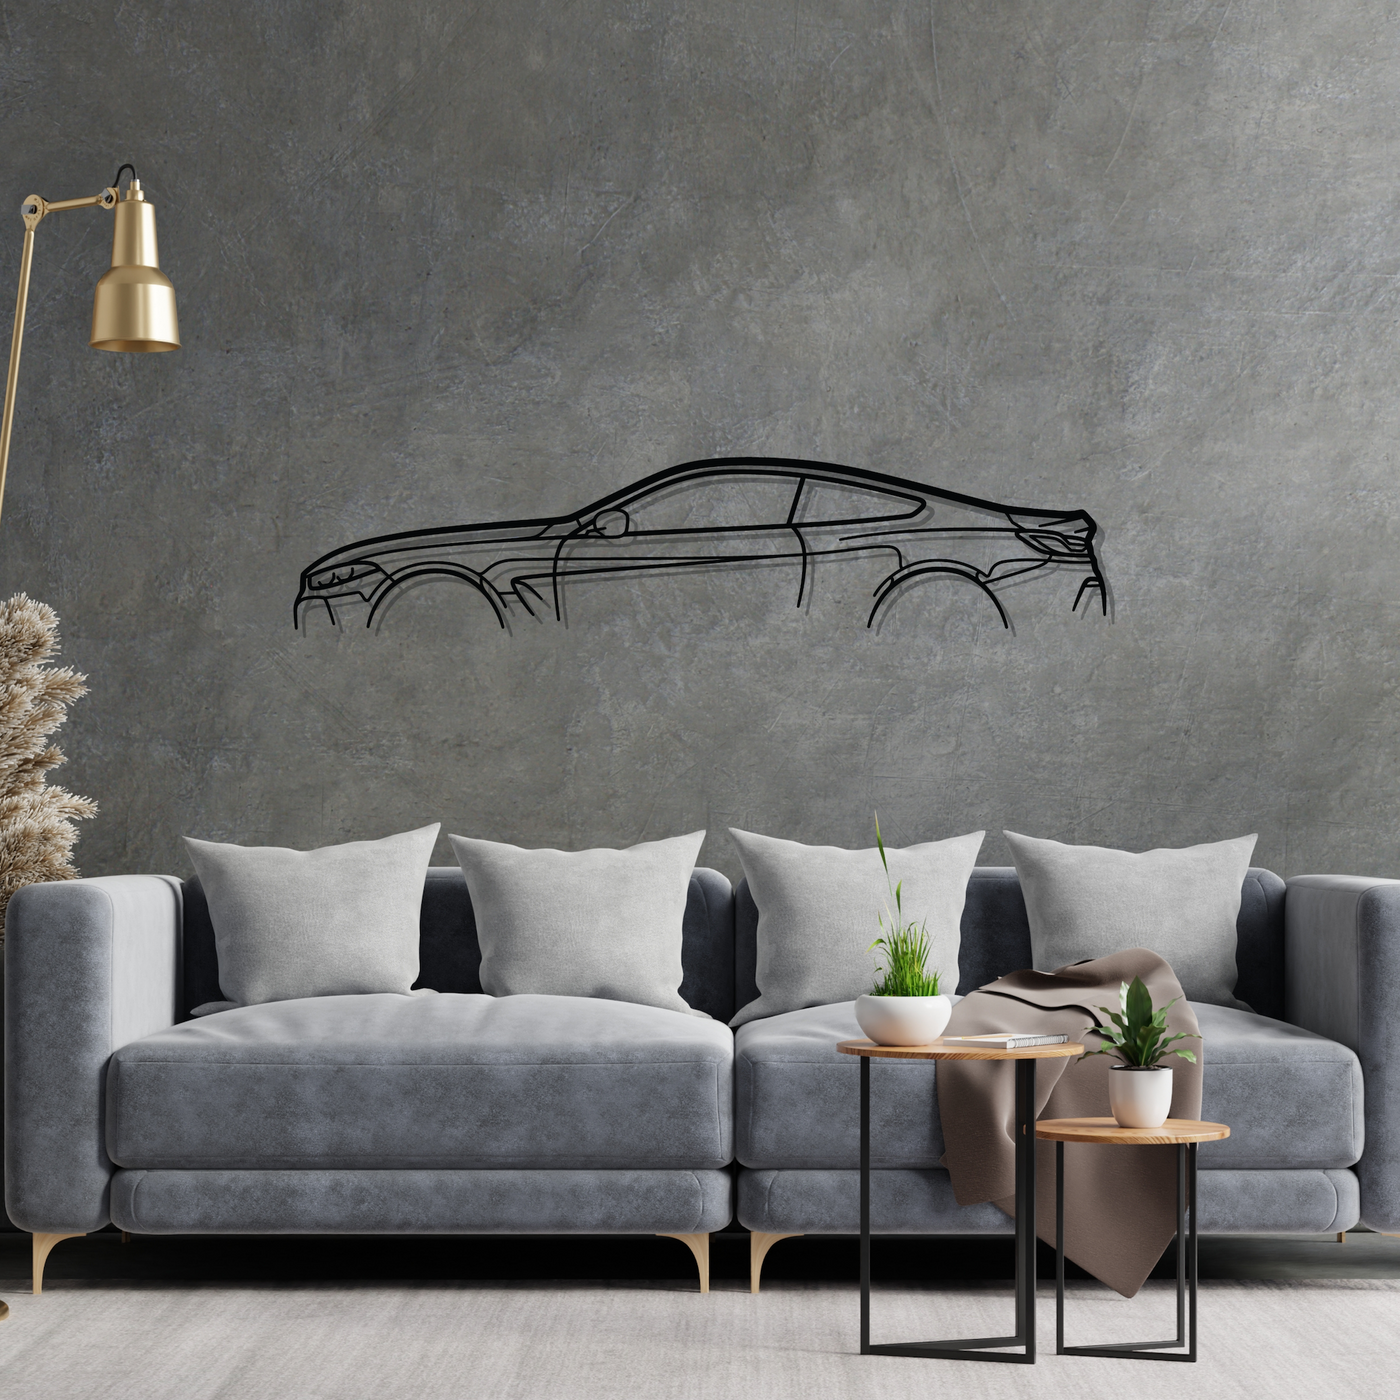 8 Series Coupe G15 Classic Metal Silhouette Wall Art